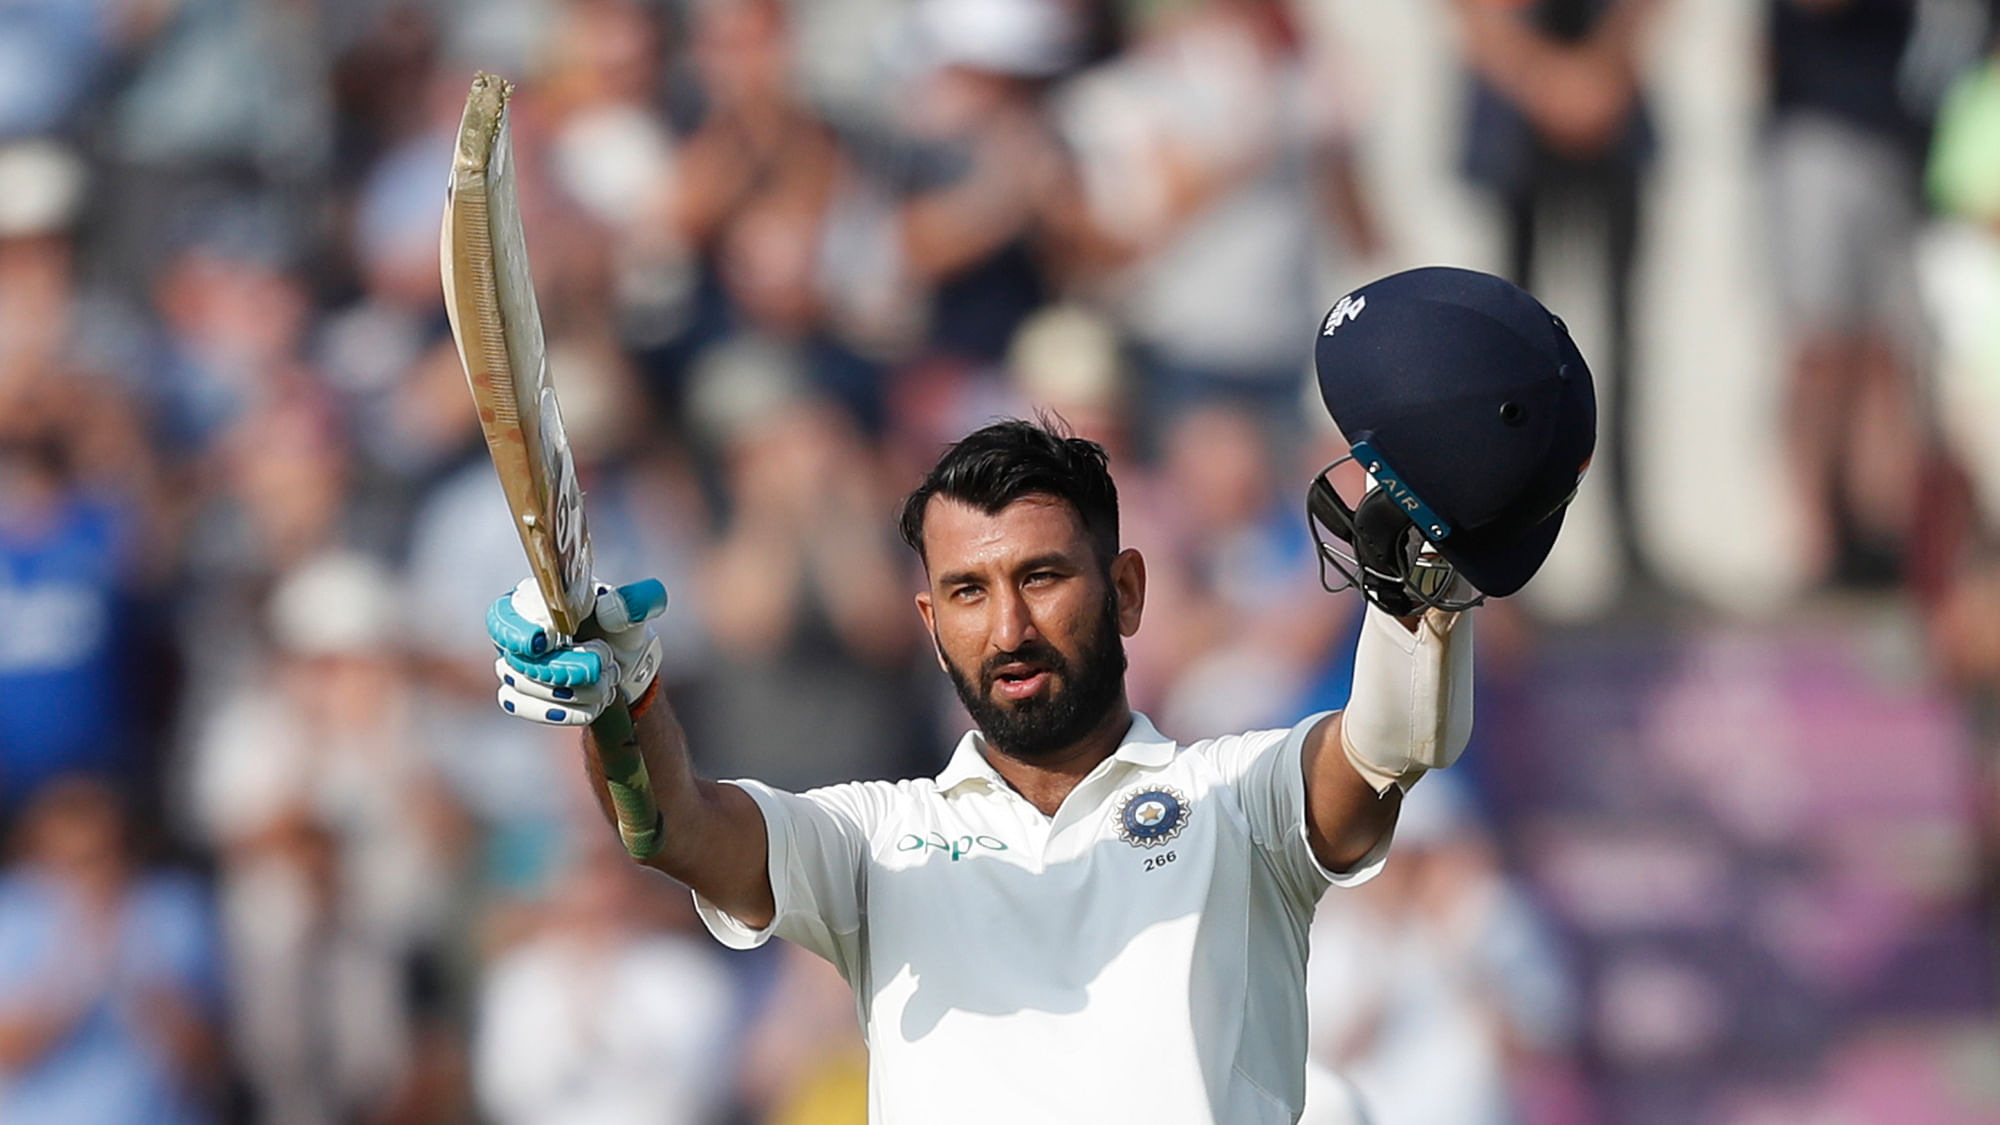 Cheteshwar Pujara celebrates getting 100 runs not out during play on the second day of the 4th cricket test match between England and India on Friday, 31 August.